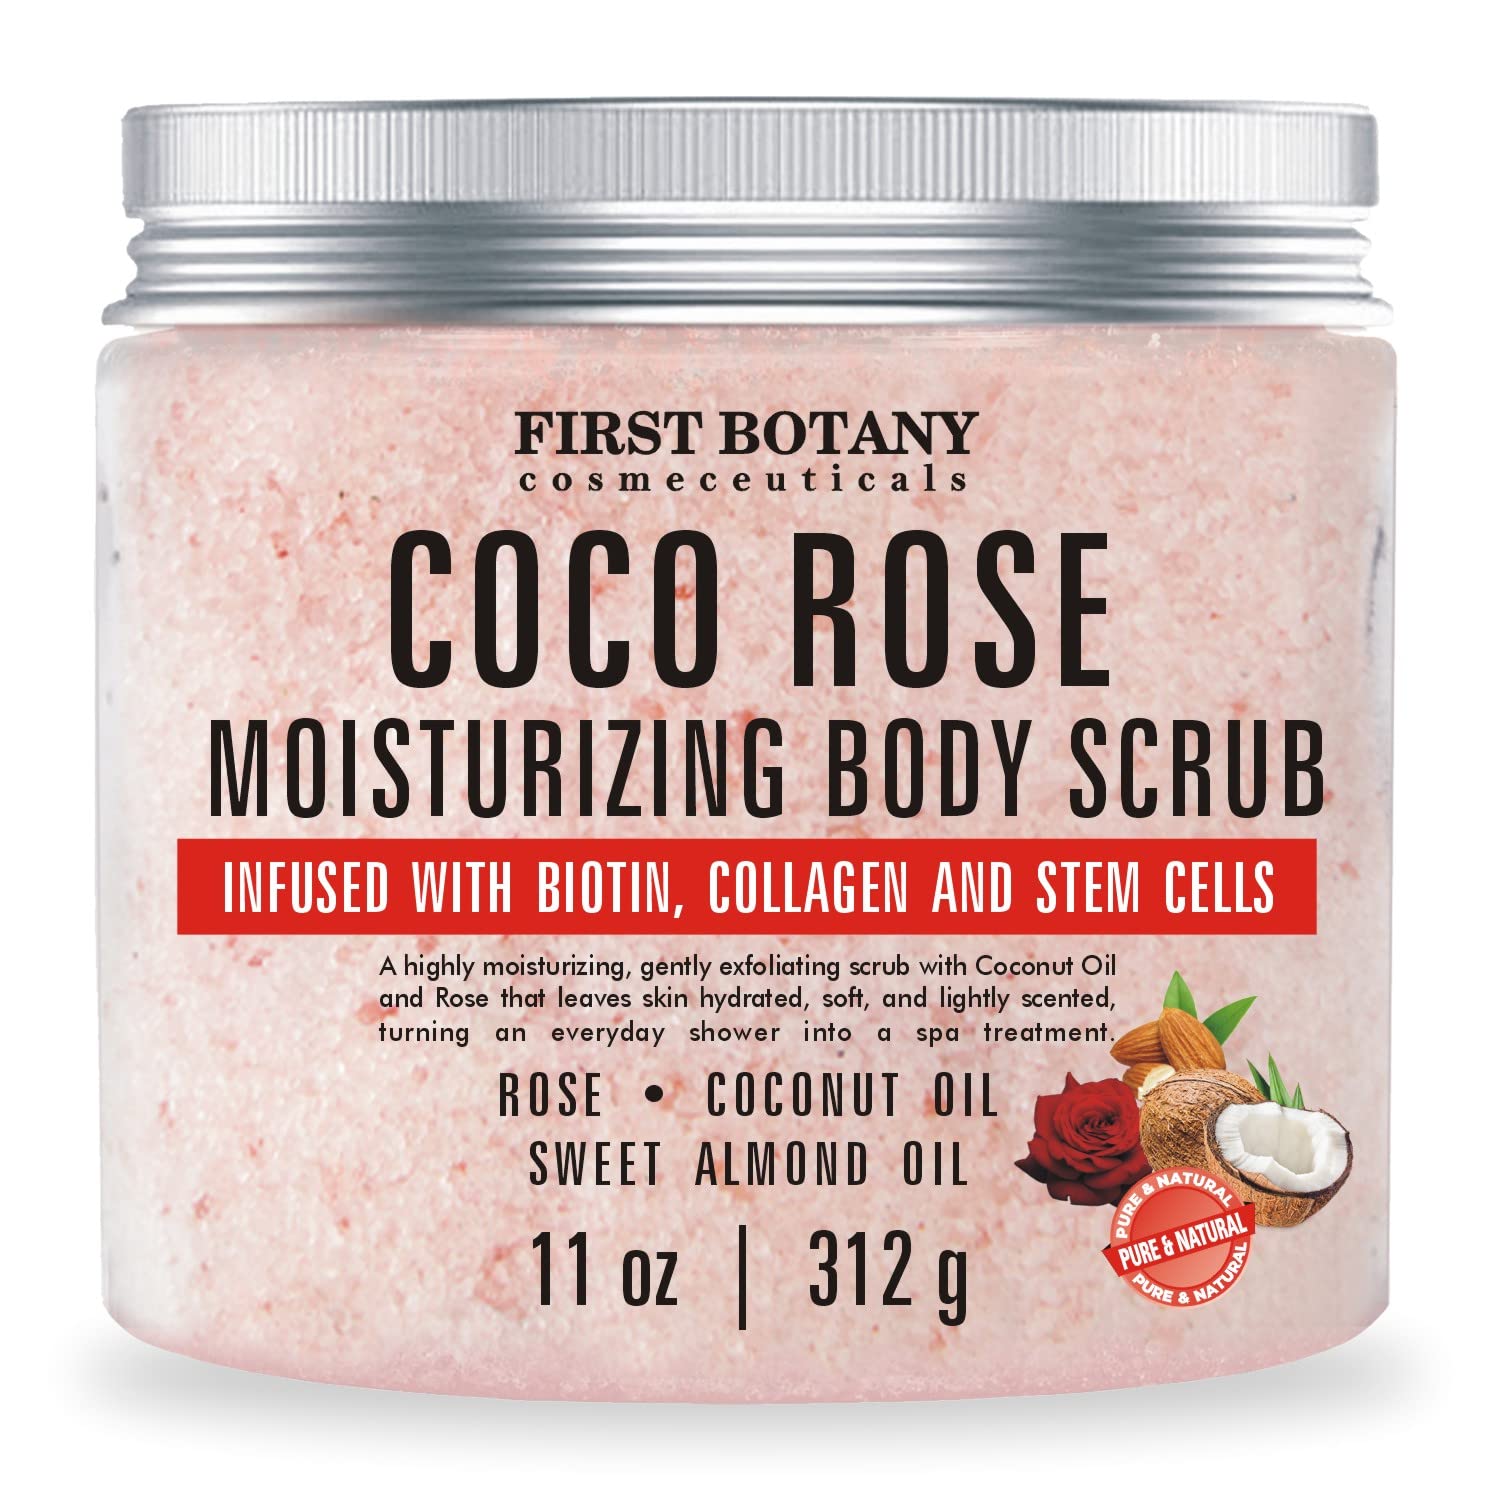 Coconut Rose Body Scrub Exfoliator with Biotin, Collagen, Stem Cells - Natural Exfoliating Salt Scrub & Body and Face Souffle helps with Moisturizing Skin, Acne, Cellulite, Skin Scars, Wrinkles- 11 oz